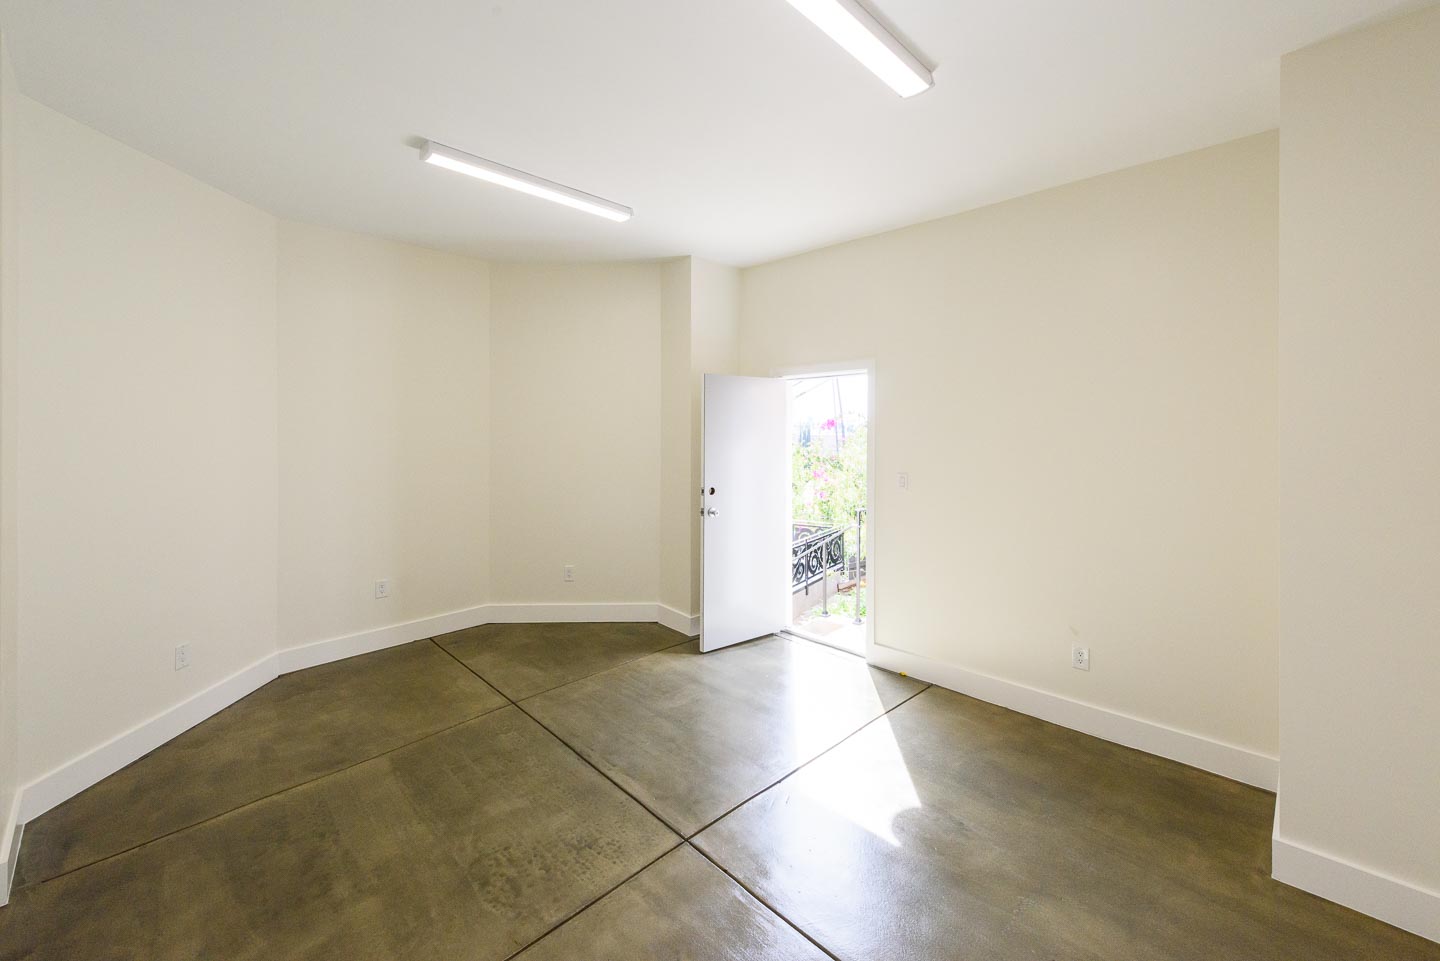  Bonus Room. Additional 200 sq. ft. with separate steel security door • Ethernet networked & electrical outlets • Stained concrete floor 